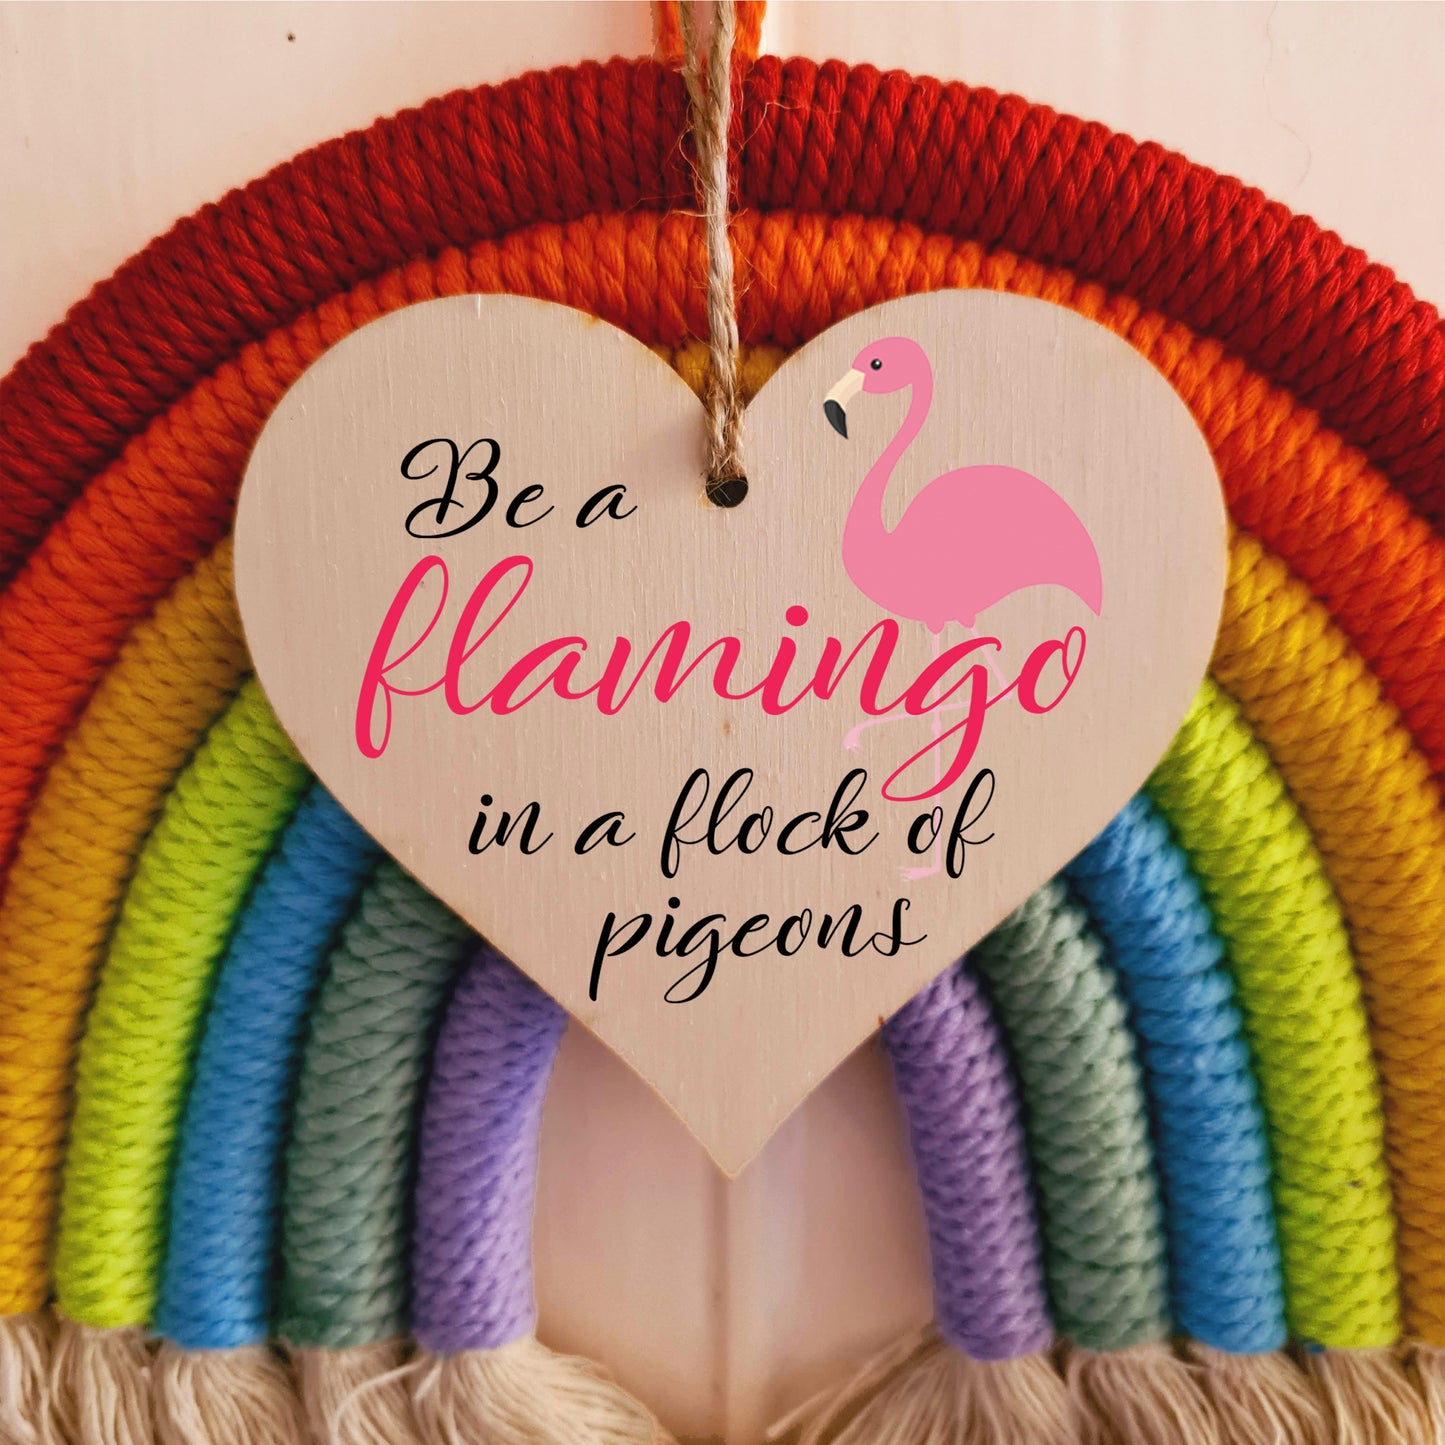 Handmade Wooden Hanging Heart Plaque Gift for Someone Special Funny Inspirational Be a Flamingo Motivational Treat